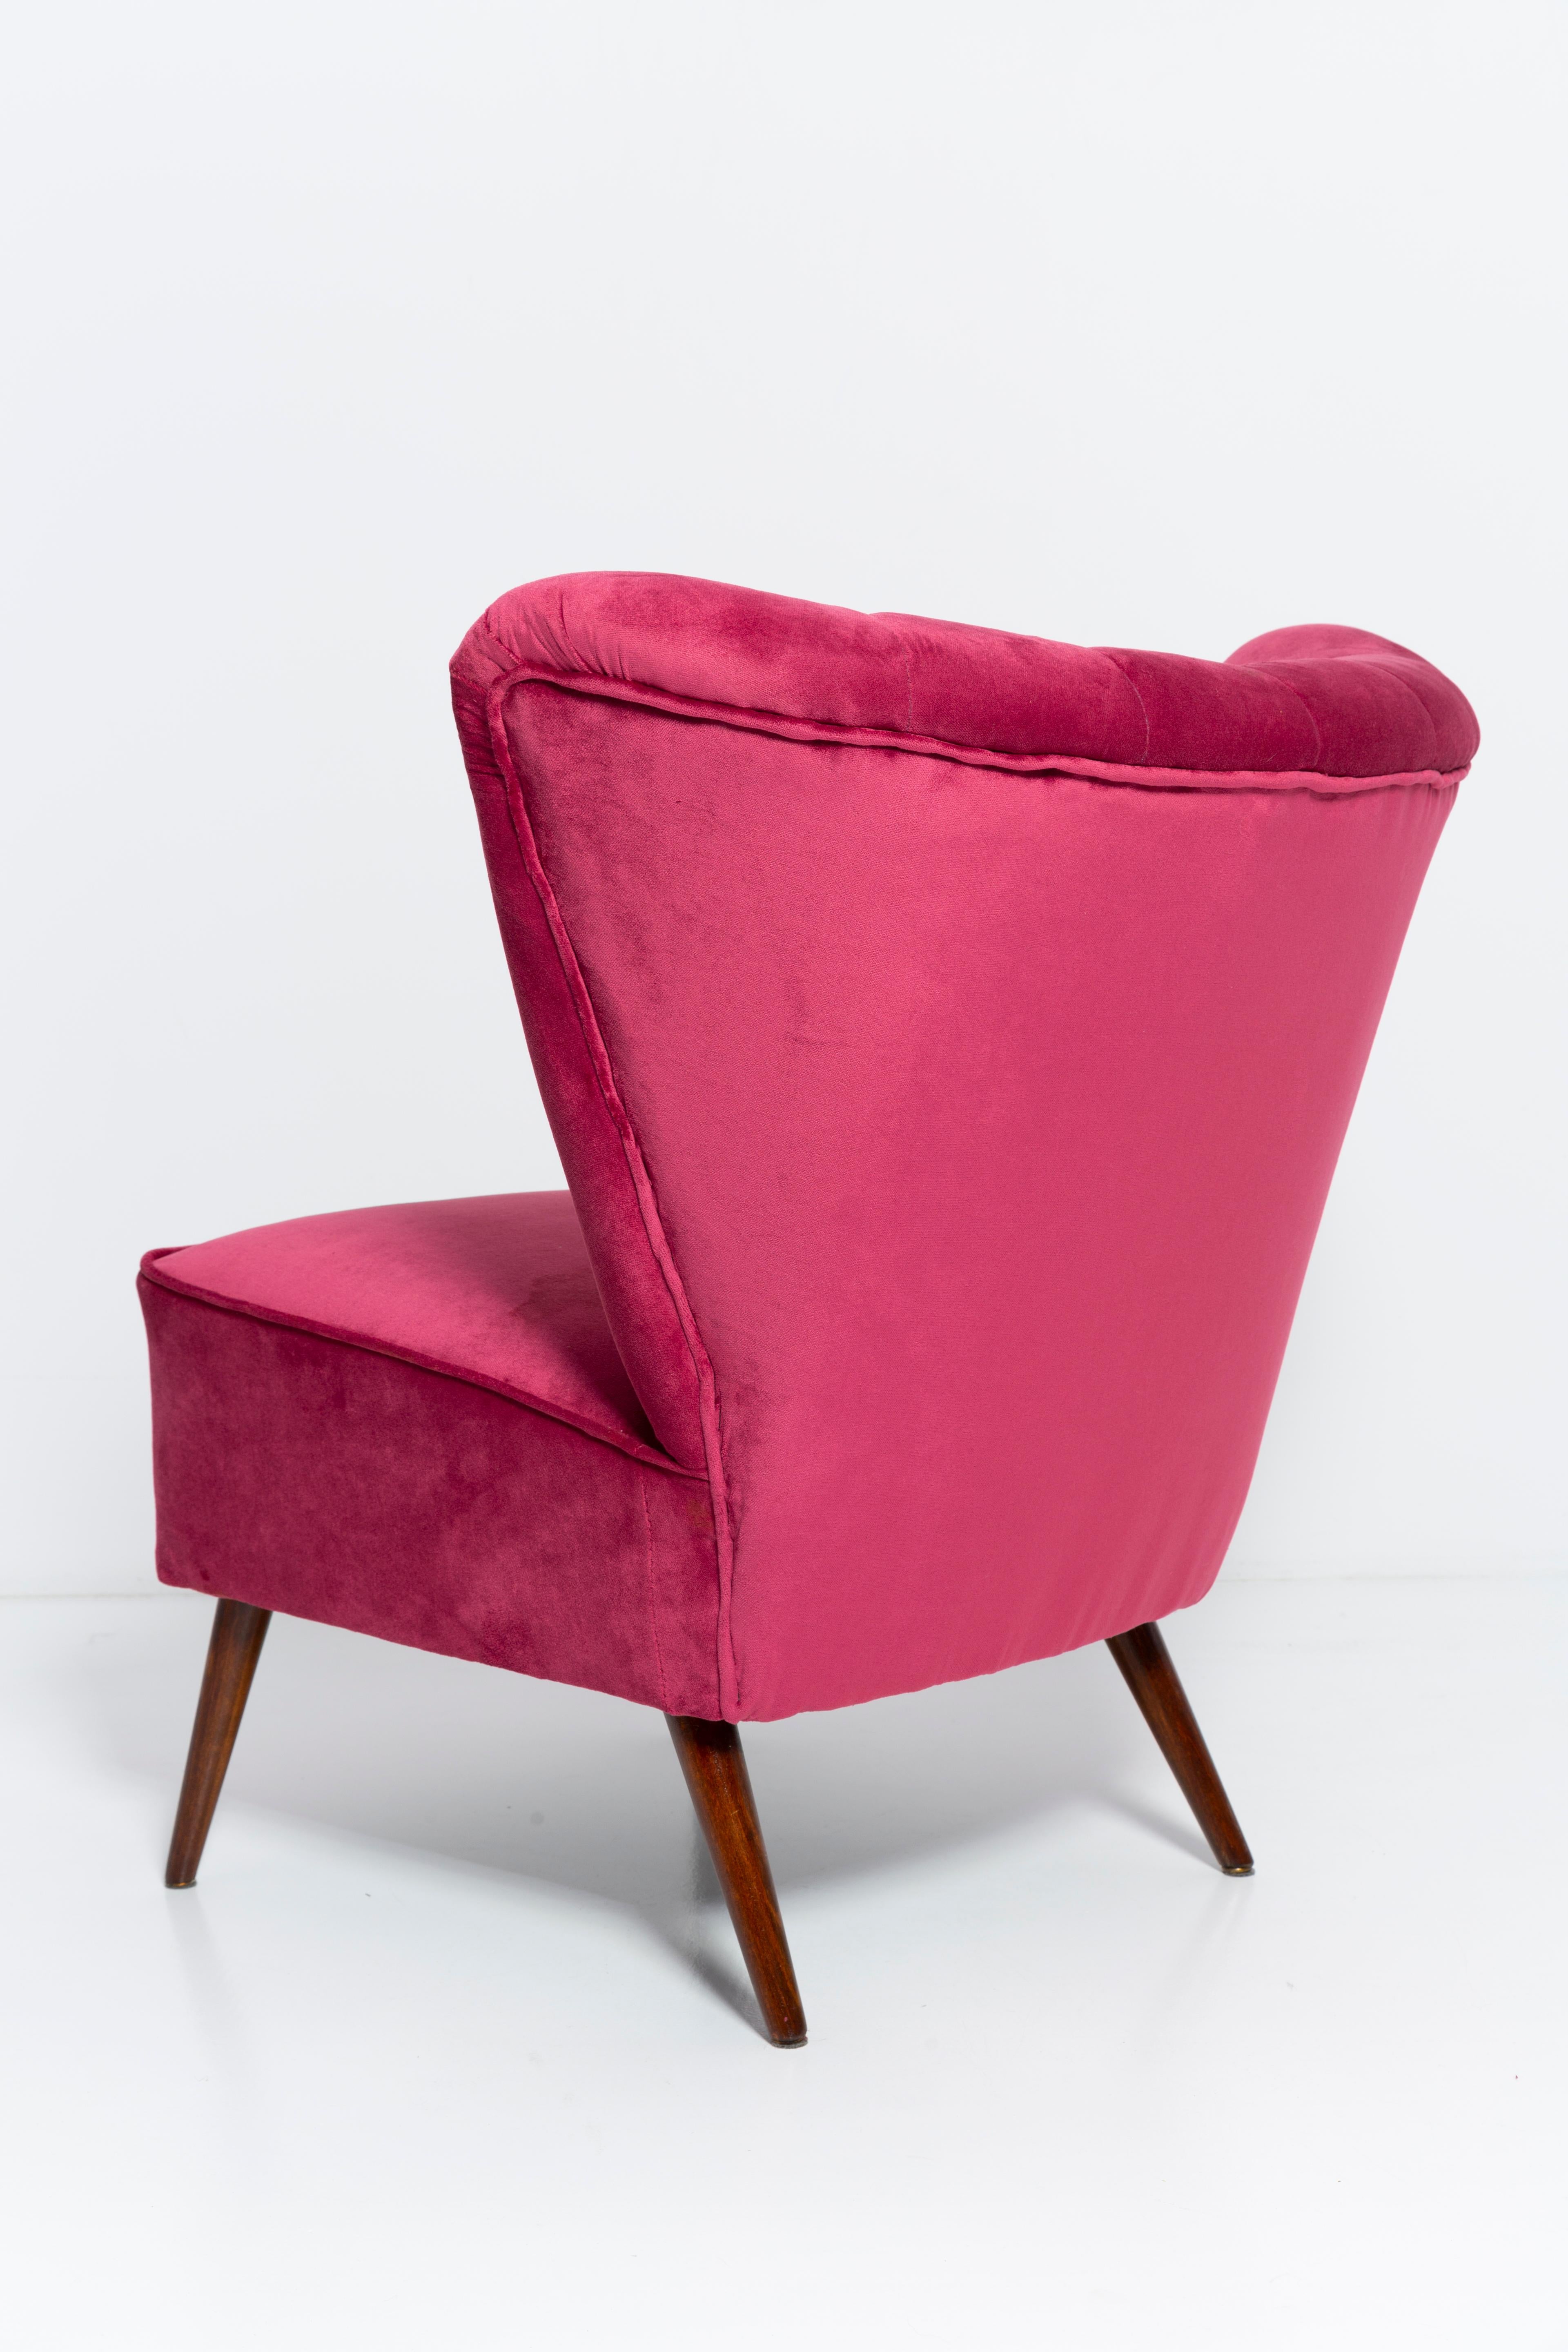 Set of Two Midcentury Magenta Pink Velvet Club Armchairs, Europe, 1960s For Sale 4